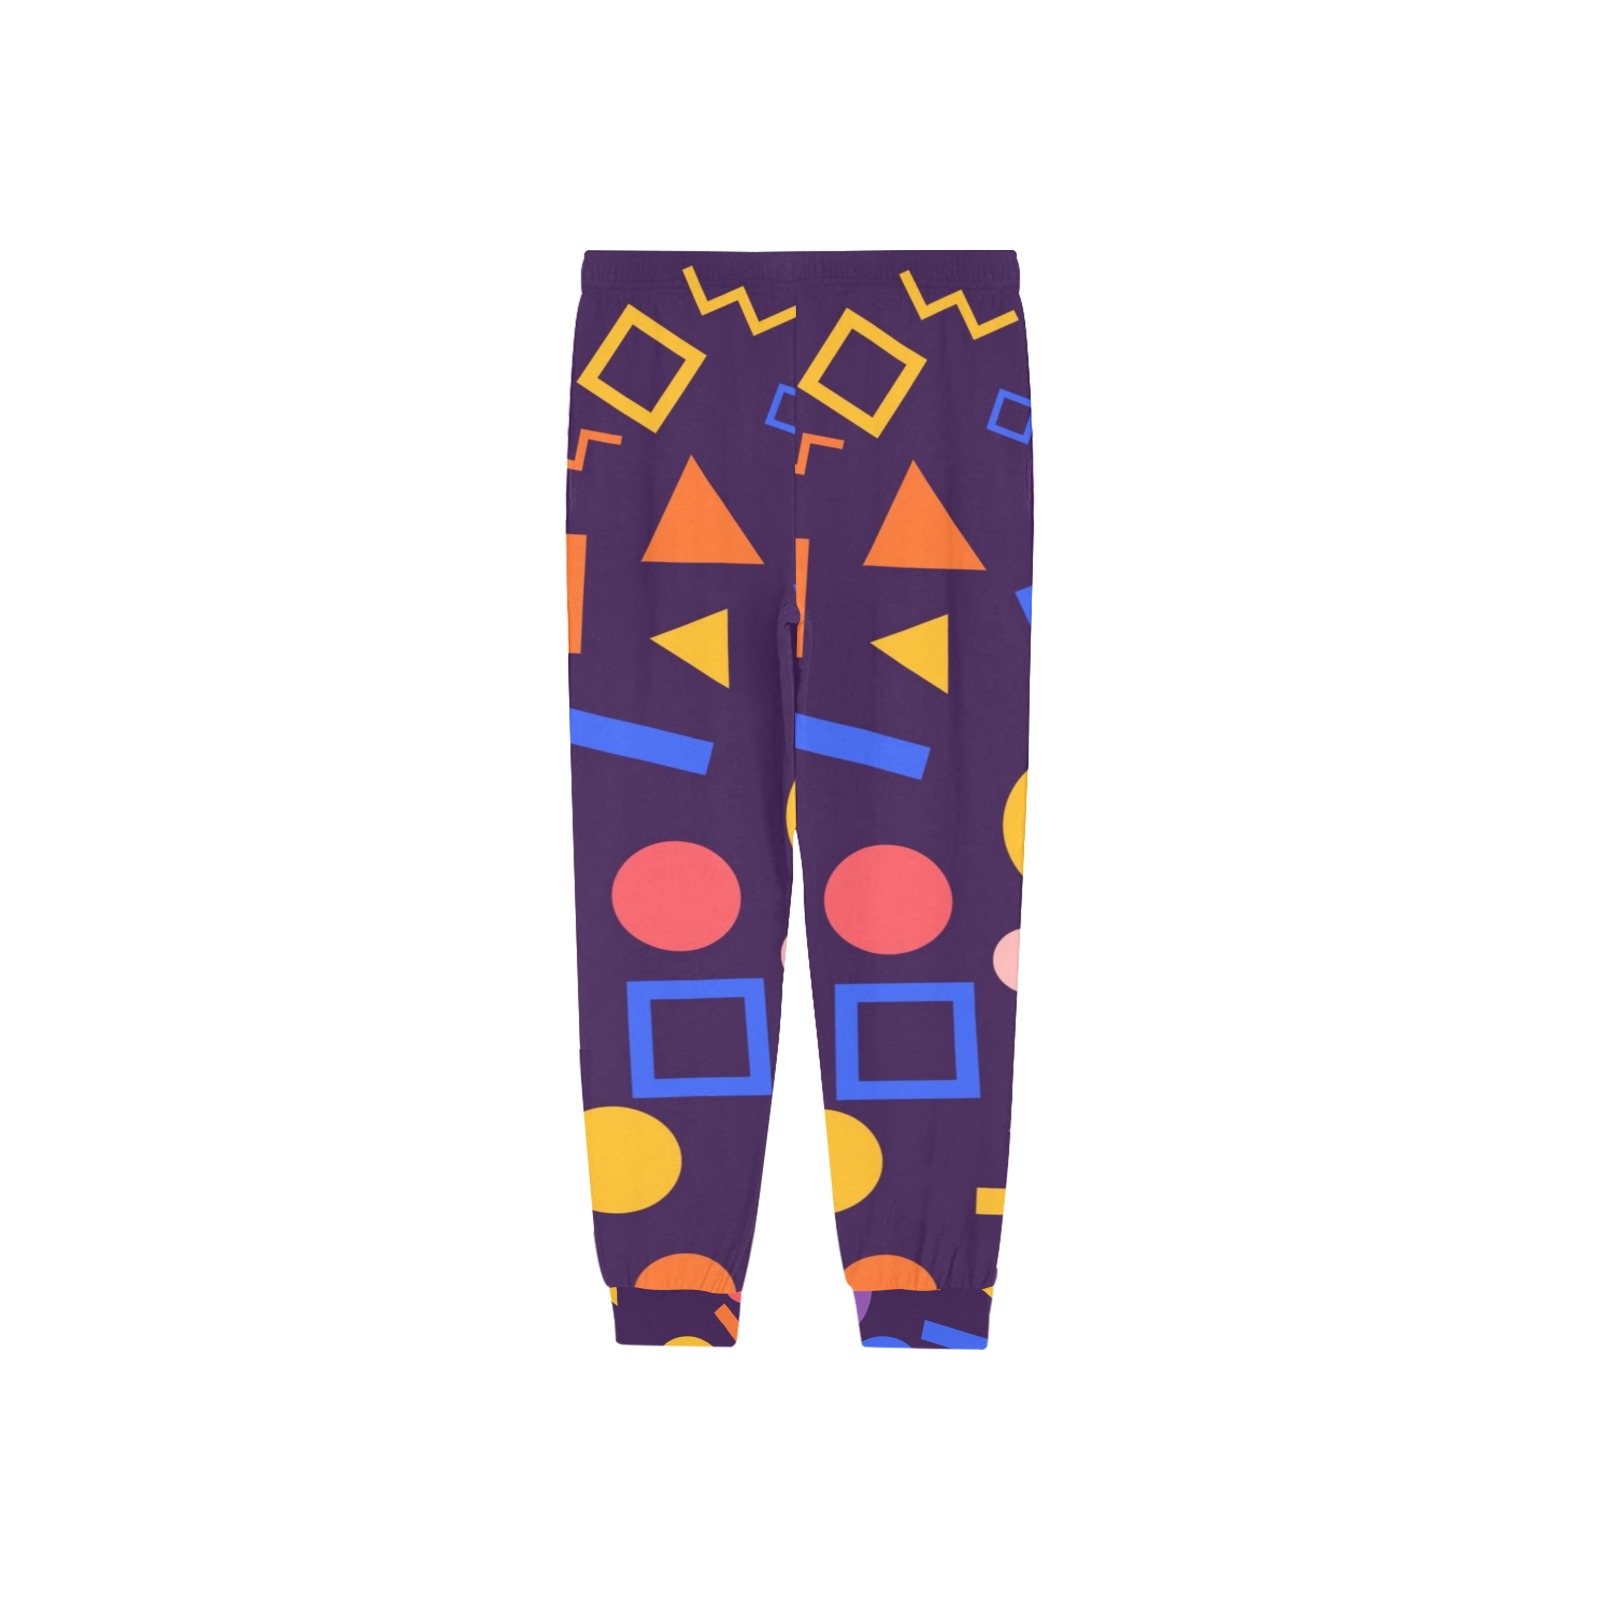 Abstract Shapes Men's Pajama Trousers with Custom Cuff